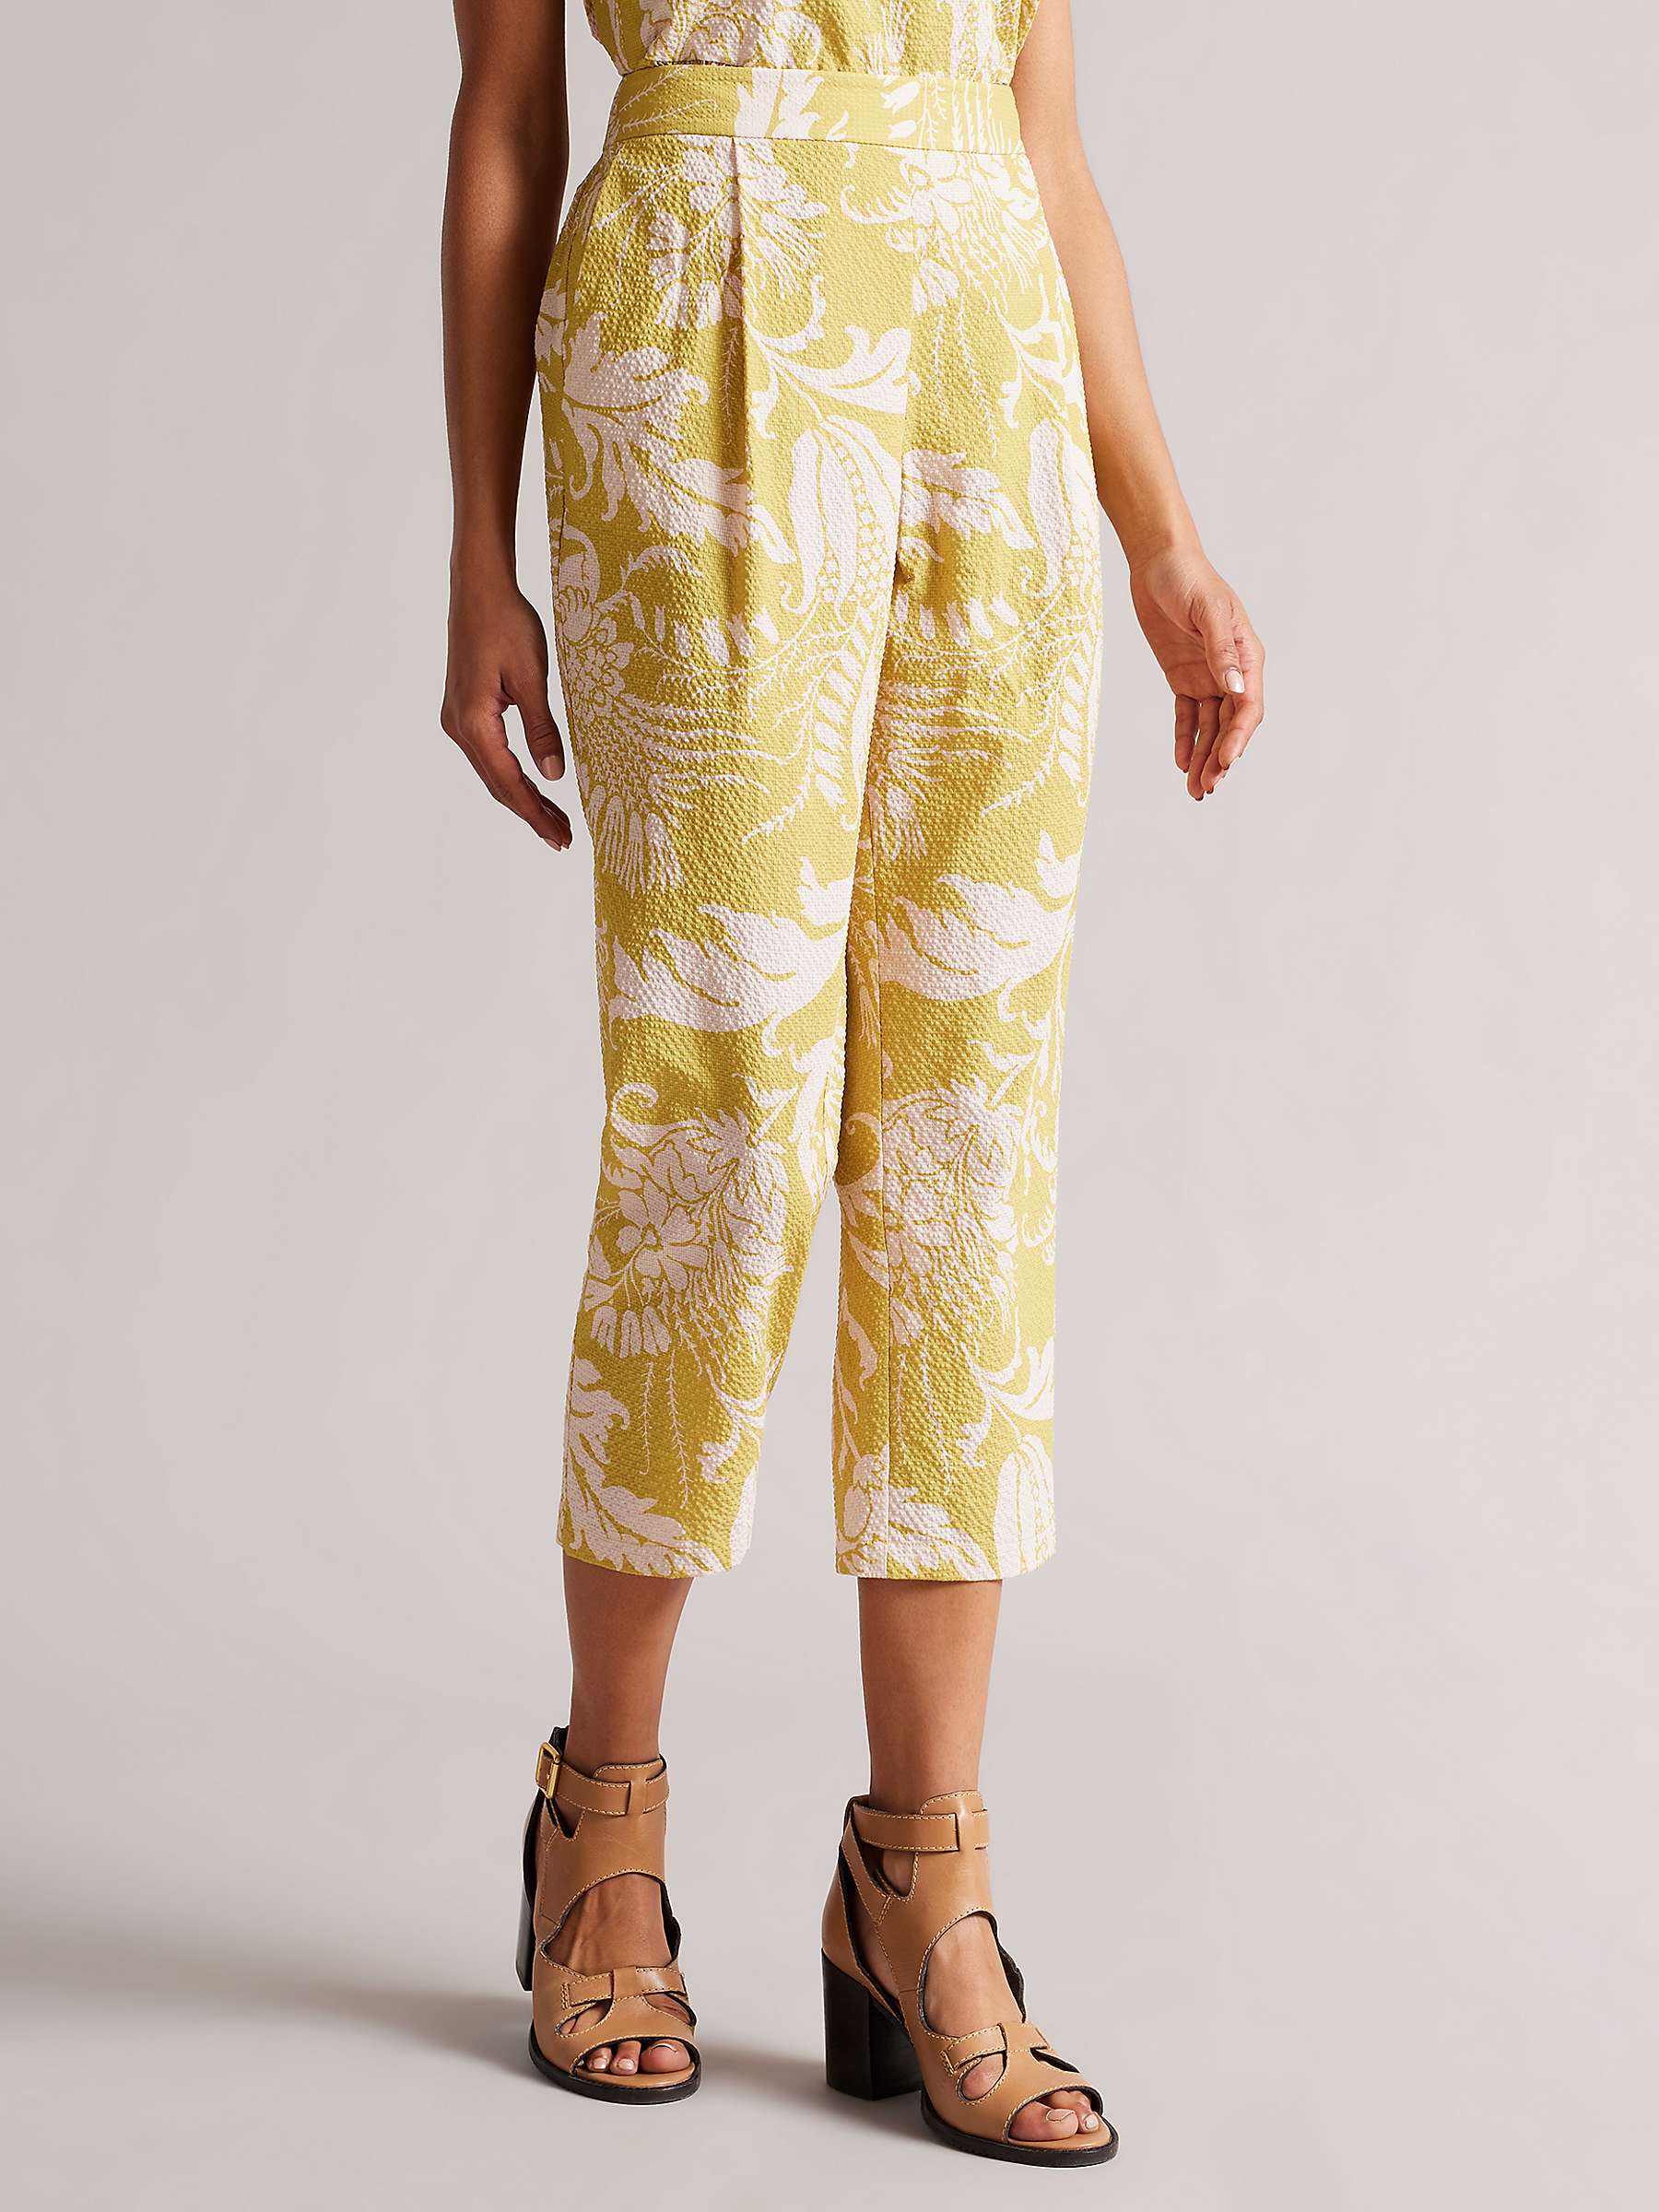 Buy Ted Baker Kaylani Textured Floral Print Cropped Trousers, Yellow Online at johnlewis.com